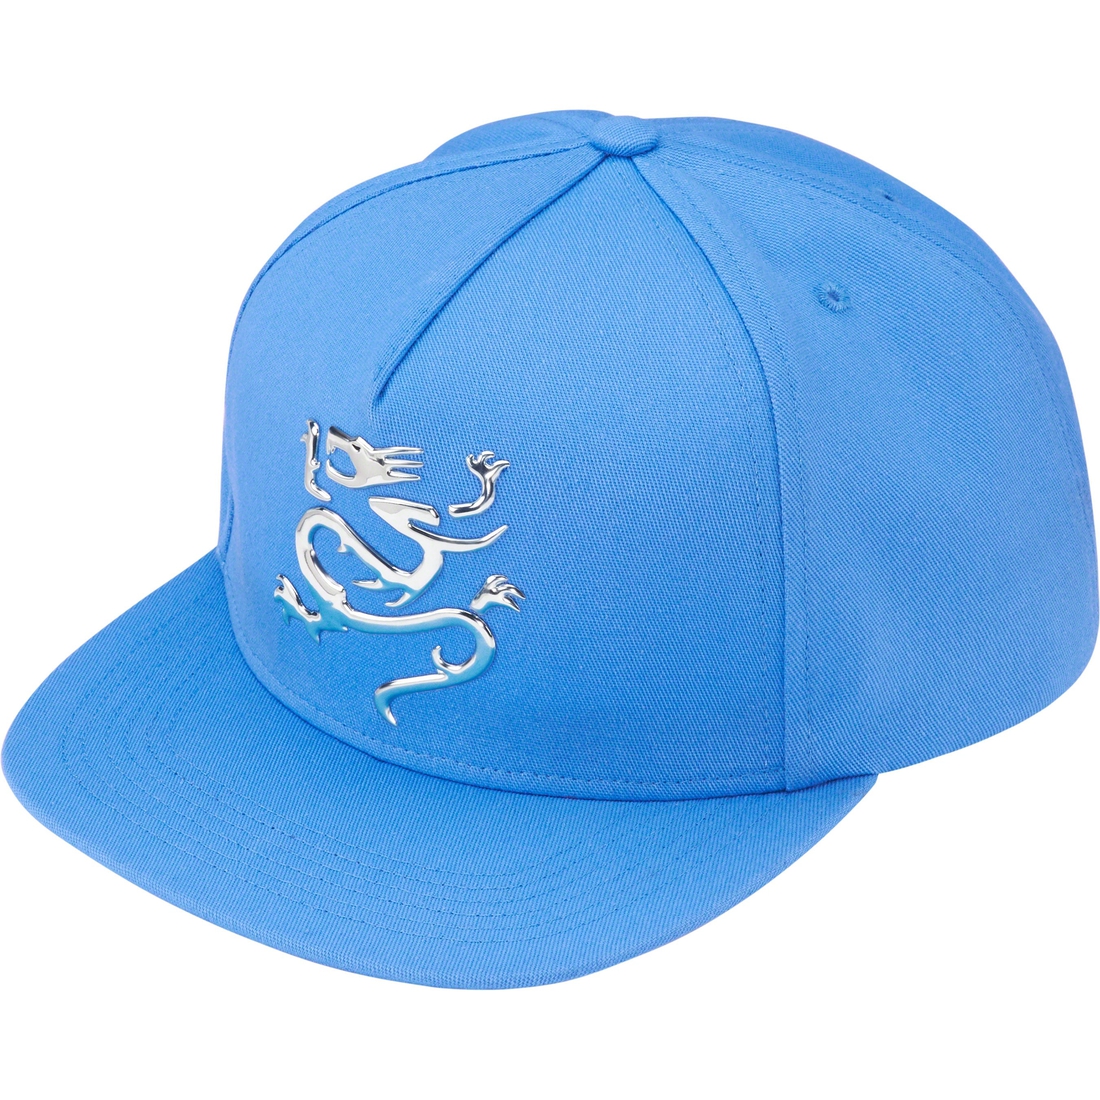 Details on Mobb Deep Dragon 5-Panel Light Blue from spring summer
                                                    2023 (Price is $50)